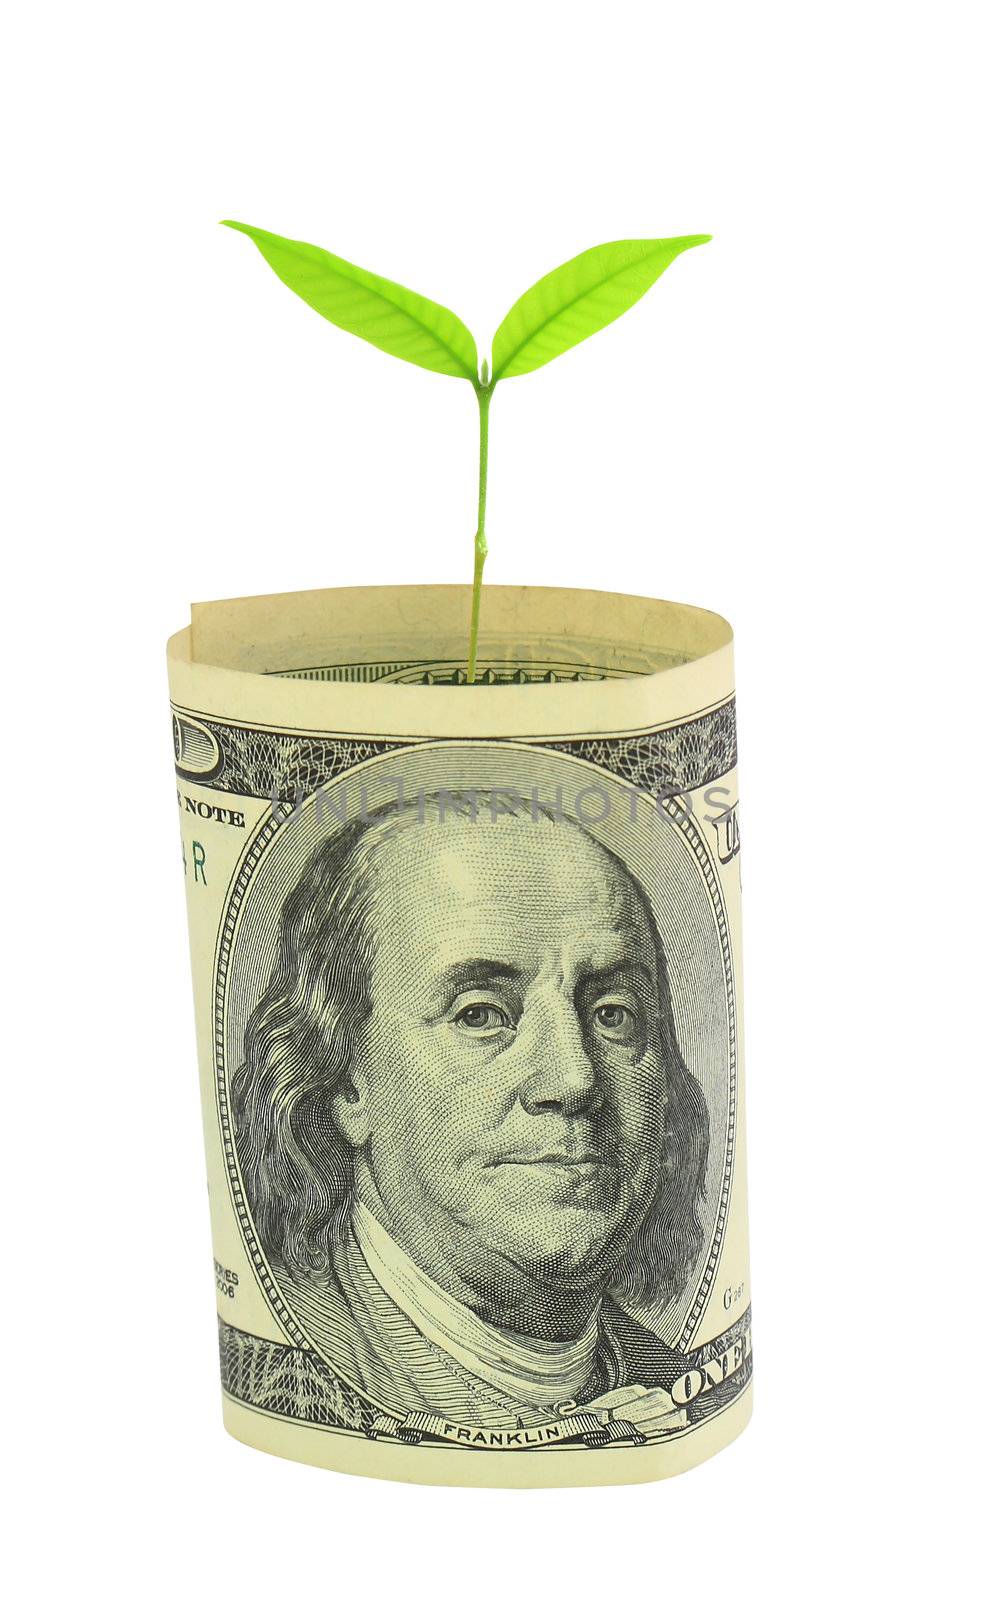 Tree growing from dollar bill by rufous